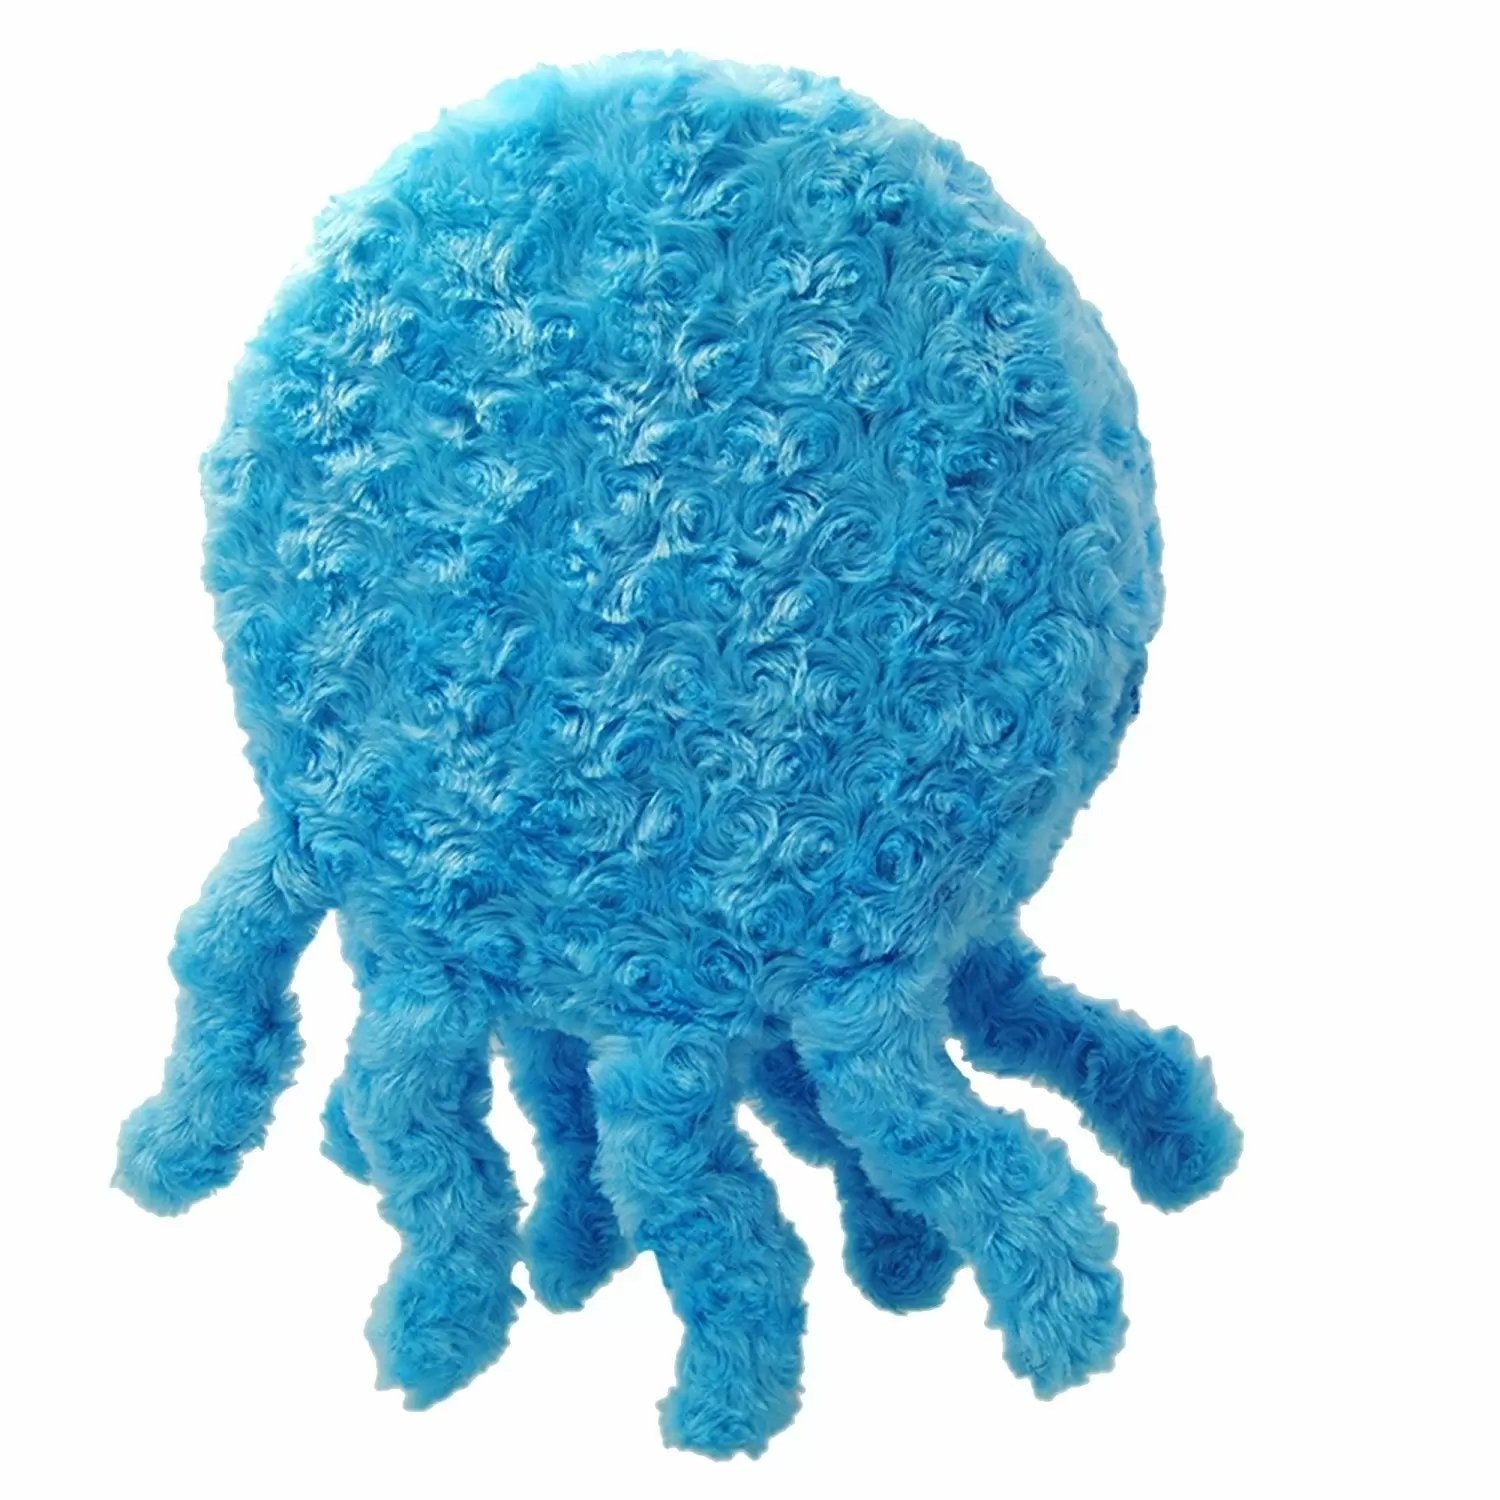 Senseez Vibrating Pillow Plushy Jelly, Introduce your little ball of energy to a wonderfully soothing sensory delight with the Senseez Vibrating Pillow Plushy Jelly. The Senseez Vibrating Pillow Plushy Jelly is calming, vibrant, lightweight, wonderfully soft, and shaped like a jellyfish complete with fluffy plush tentacles, this unique, plush cushion is great for keeping energetic kids sitting down and focused. What's the secret? - Hidden inside the Senseez Vibrating Pillow Plushy Jelly is a pressure-sensit